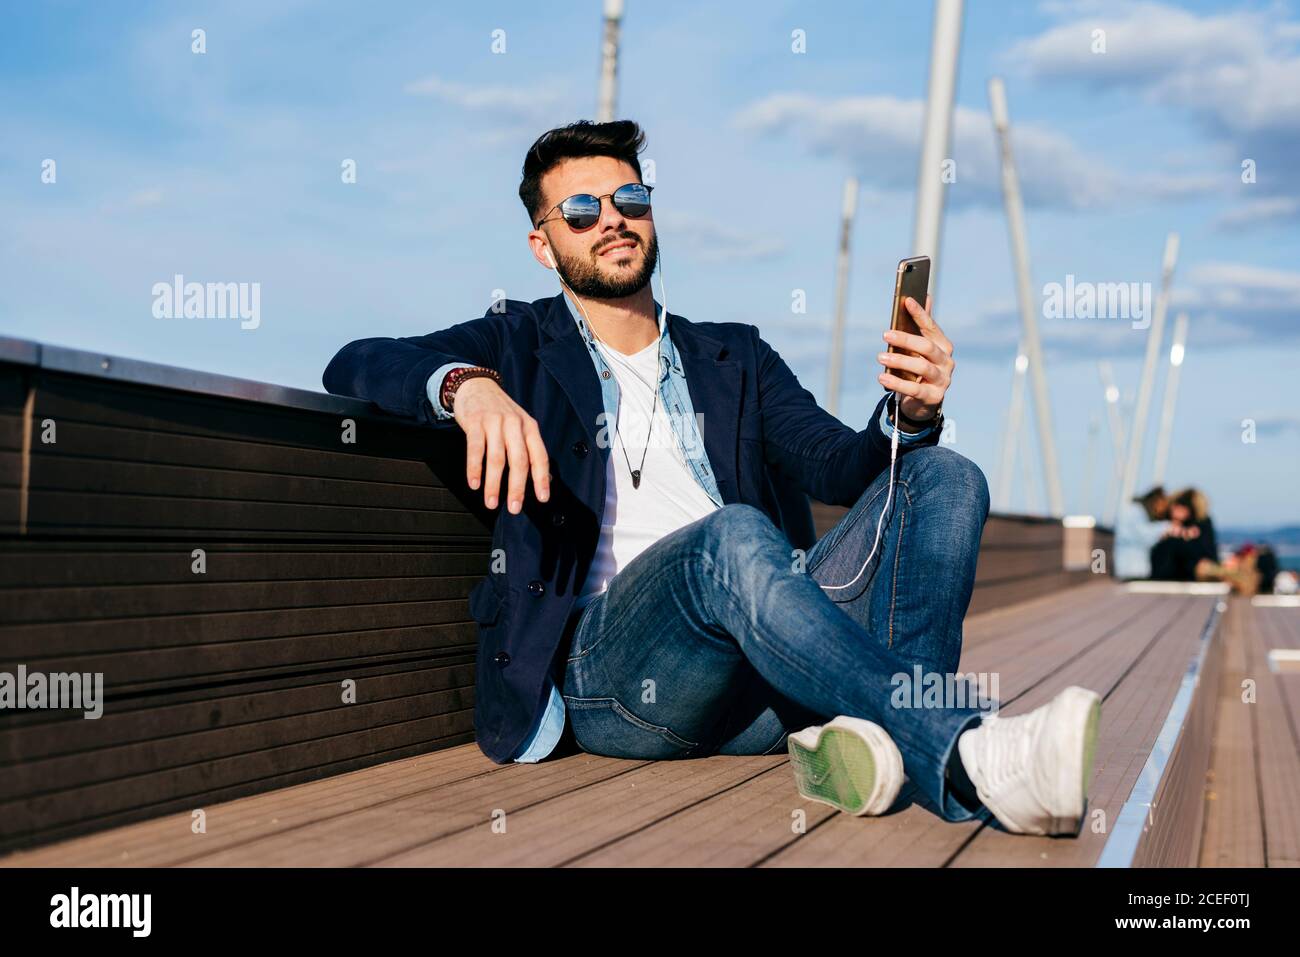 Trendy dandy man in sunglasses and jacket chilling with smartphone and headphones on promenade. Stock Photo